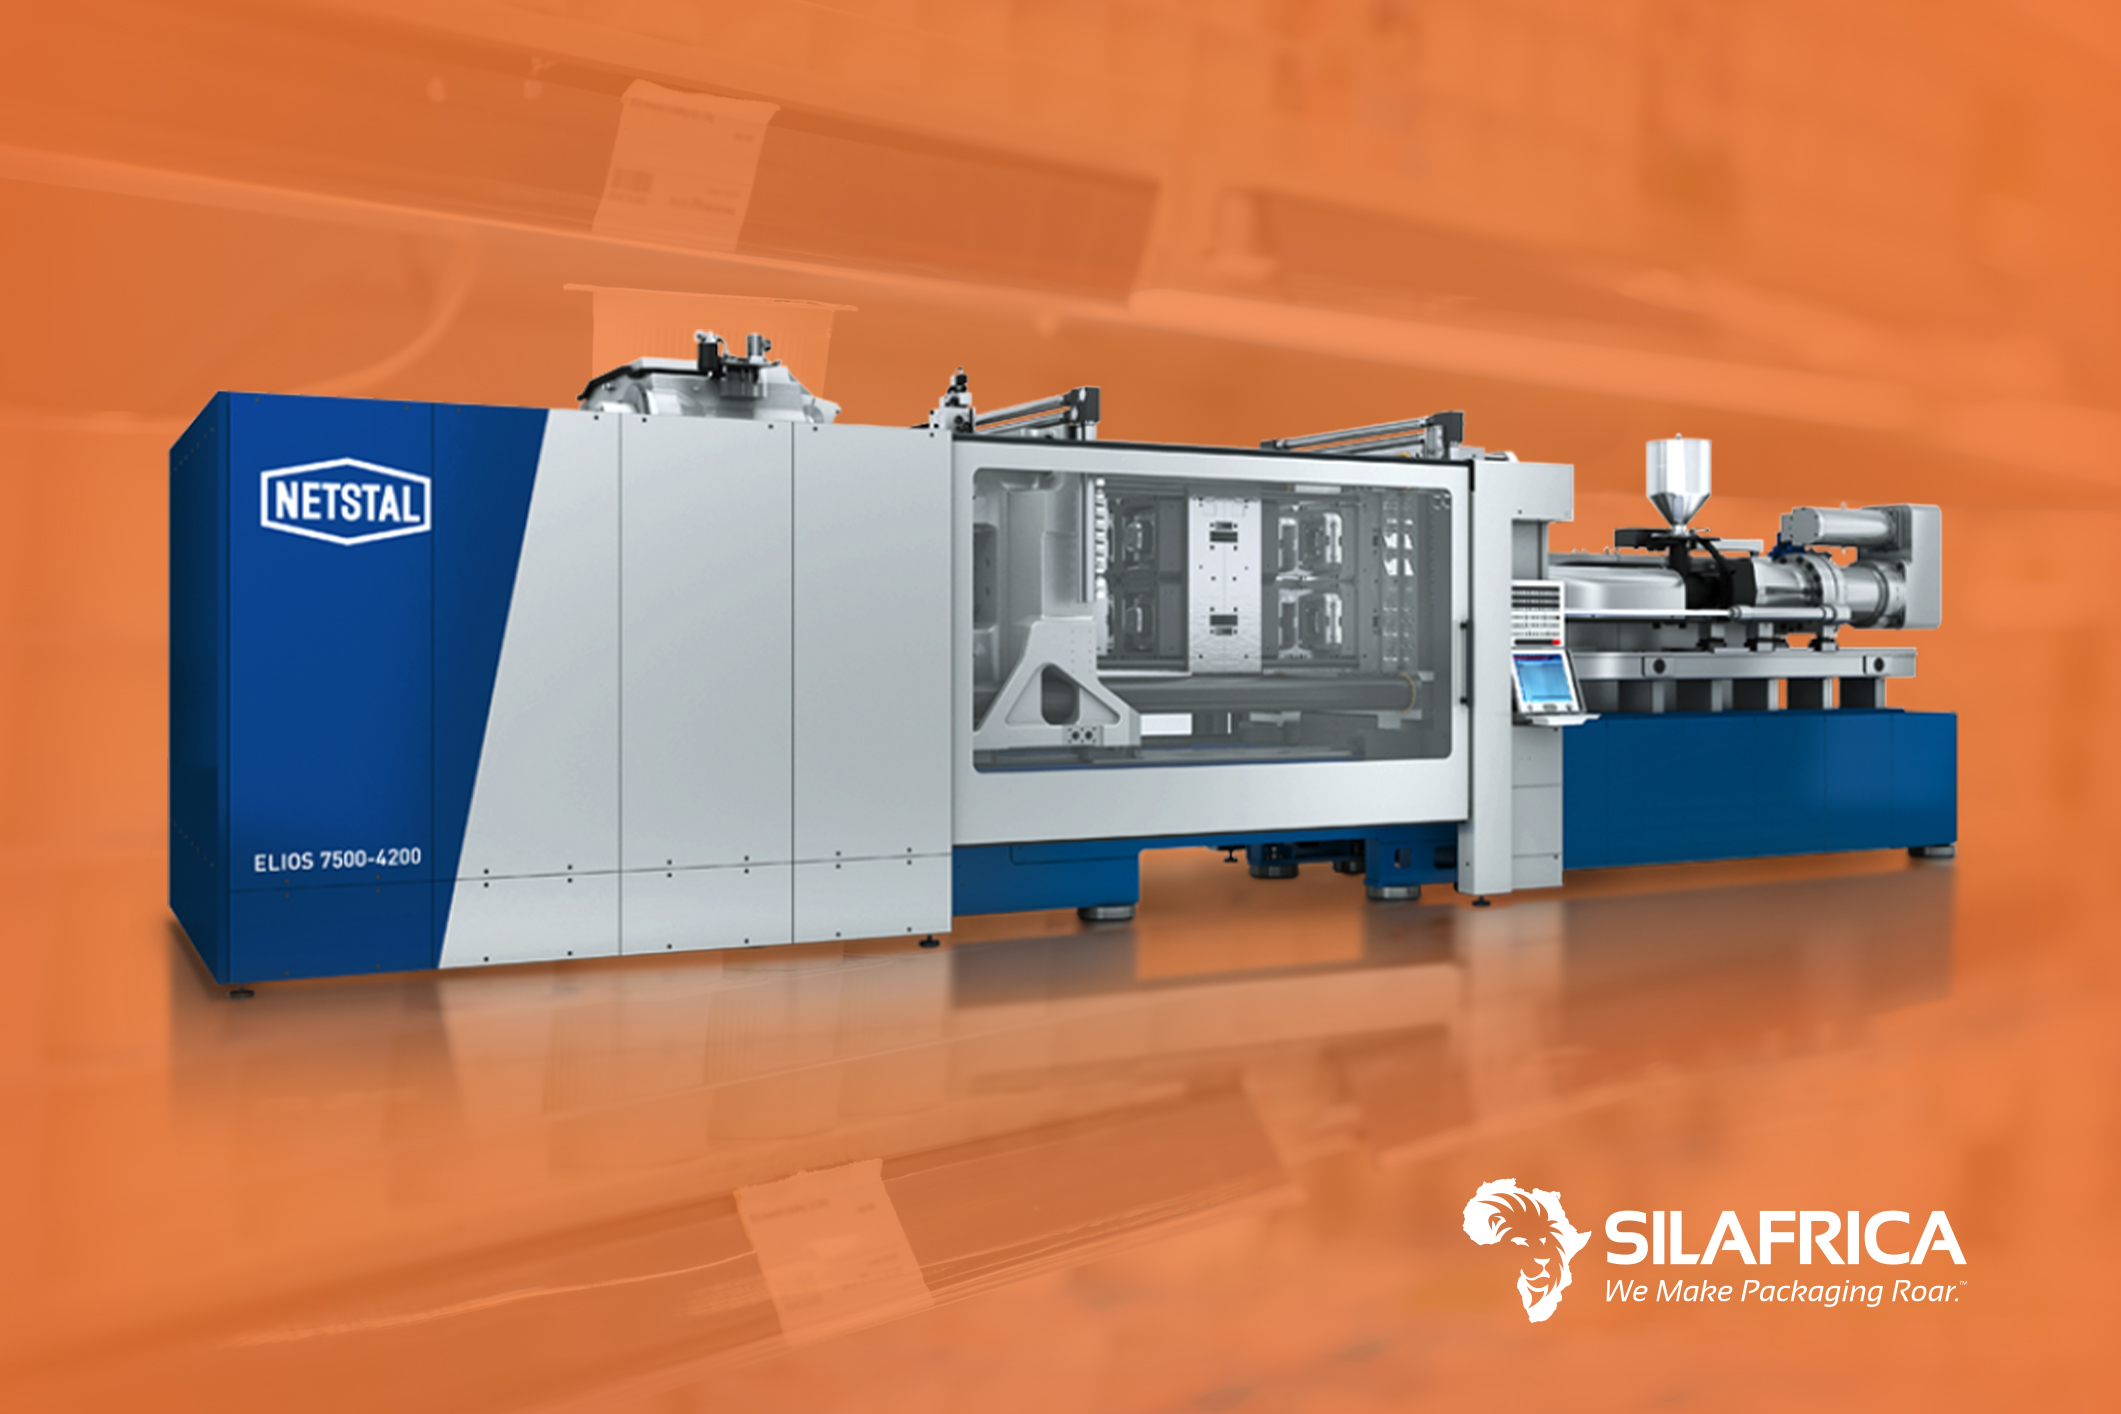 Silafrica Injection Compression Molding requires less material, yet still maintains outstanding package strength and rigidity.